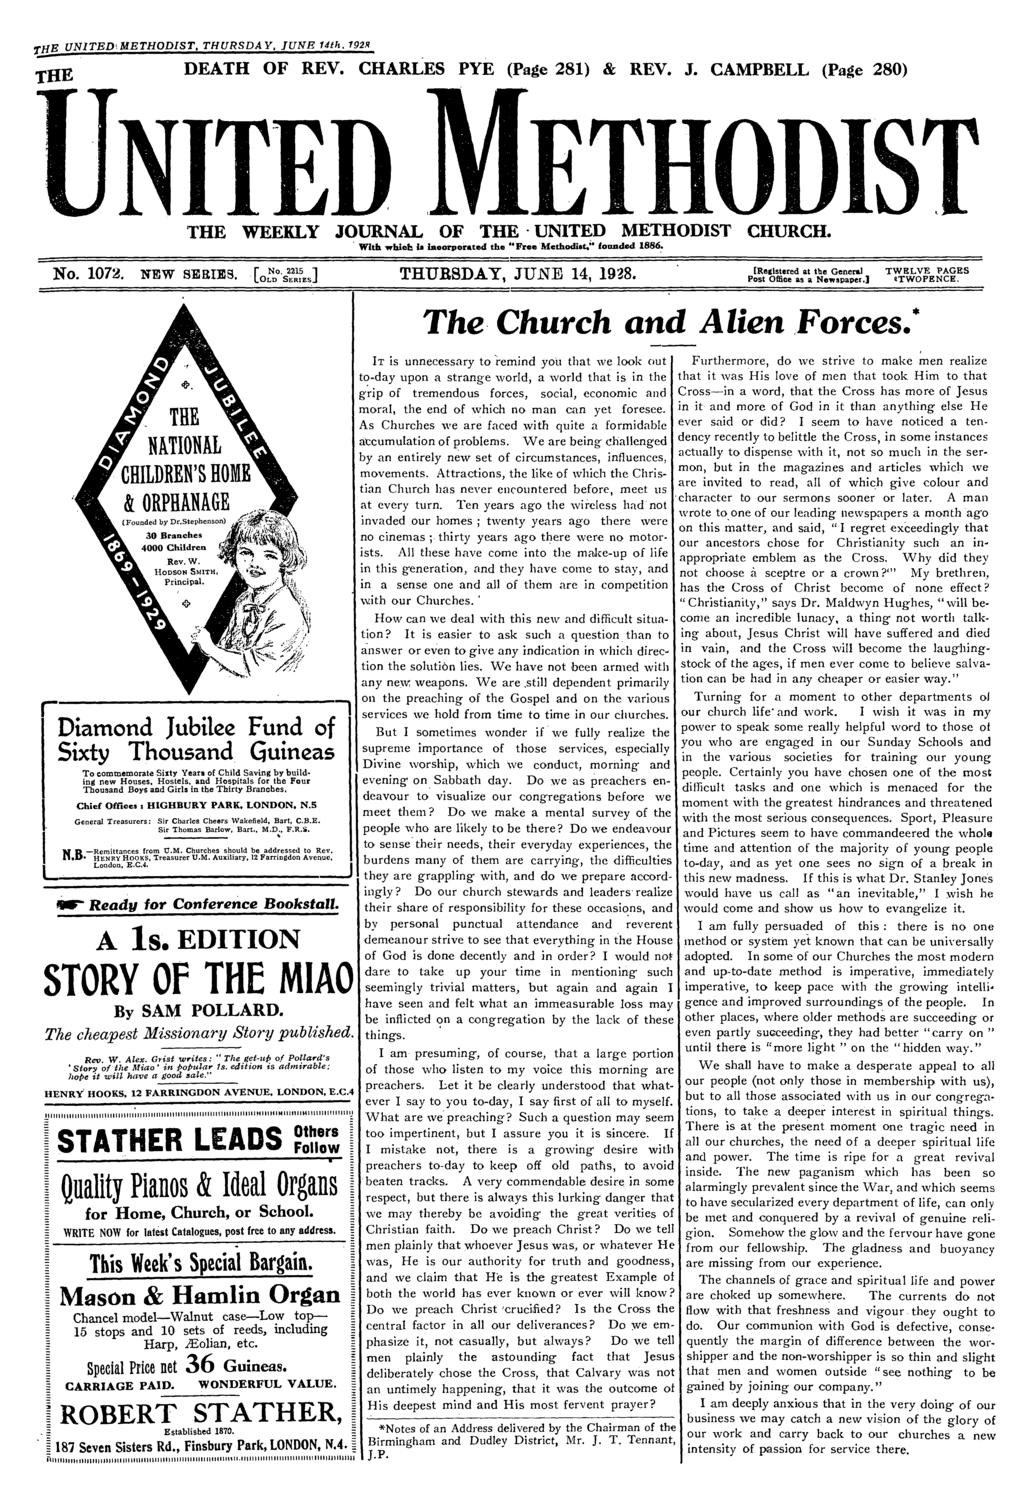 THE UNITED METHODIST, THURSDAY, JUNE 14th, 192k THE DEATH OF REV. CHARLES PYE (Page 281) & REV. J. CAMPBELL (Page 280) NITER ETHODIST THE WEEKLY JOURNAL OF THE - UNITED METHODIST CHURCH.